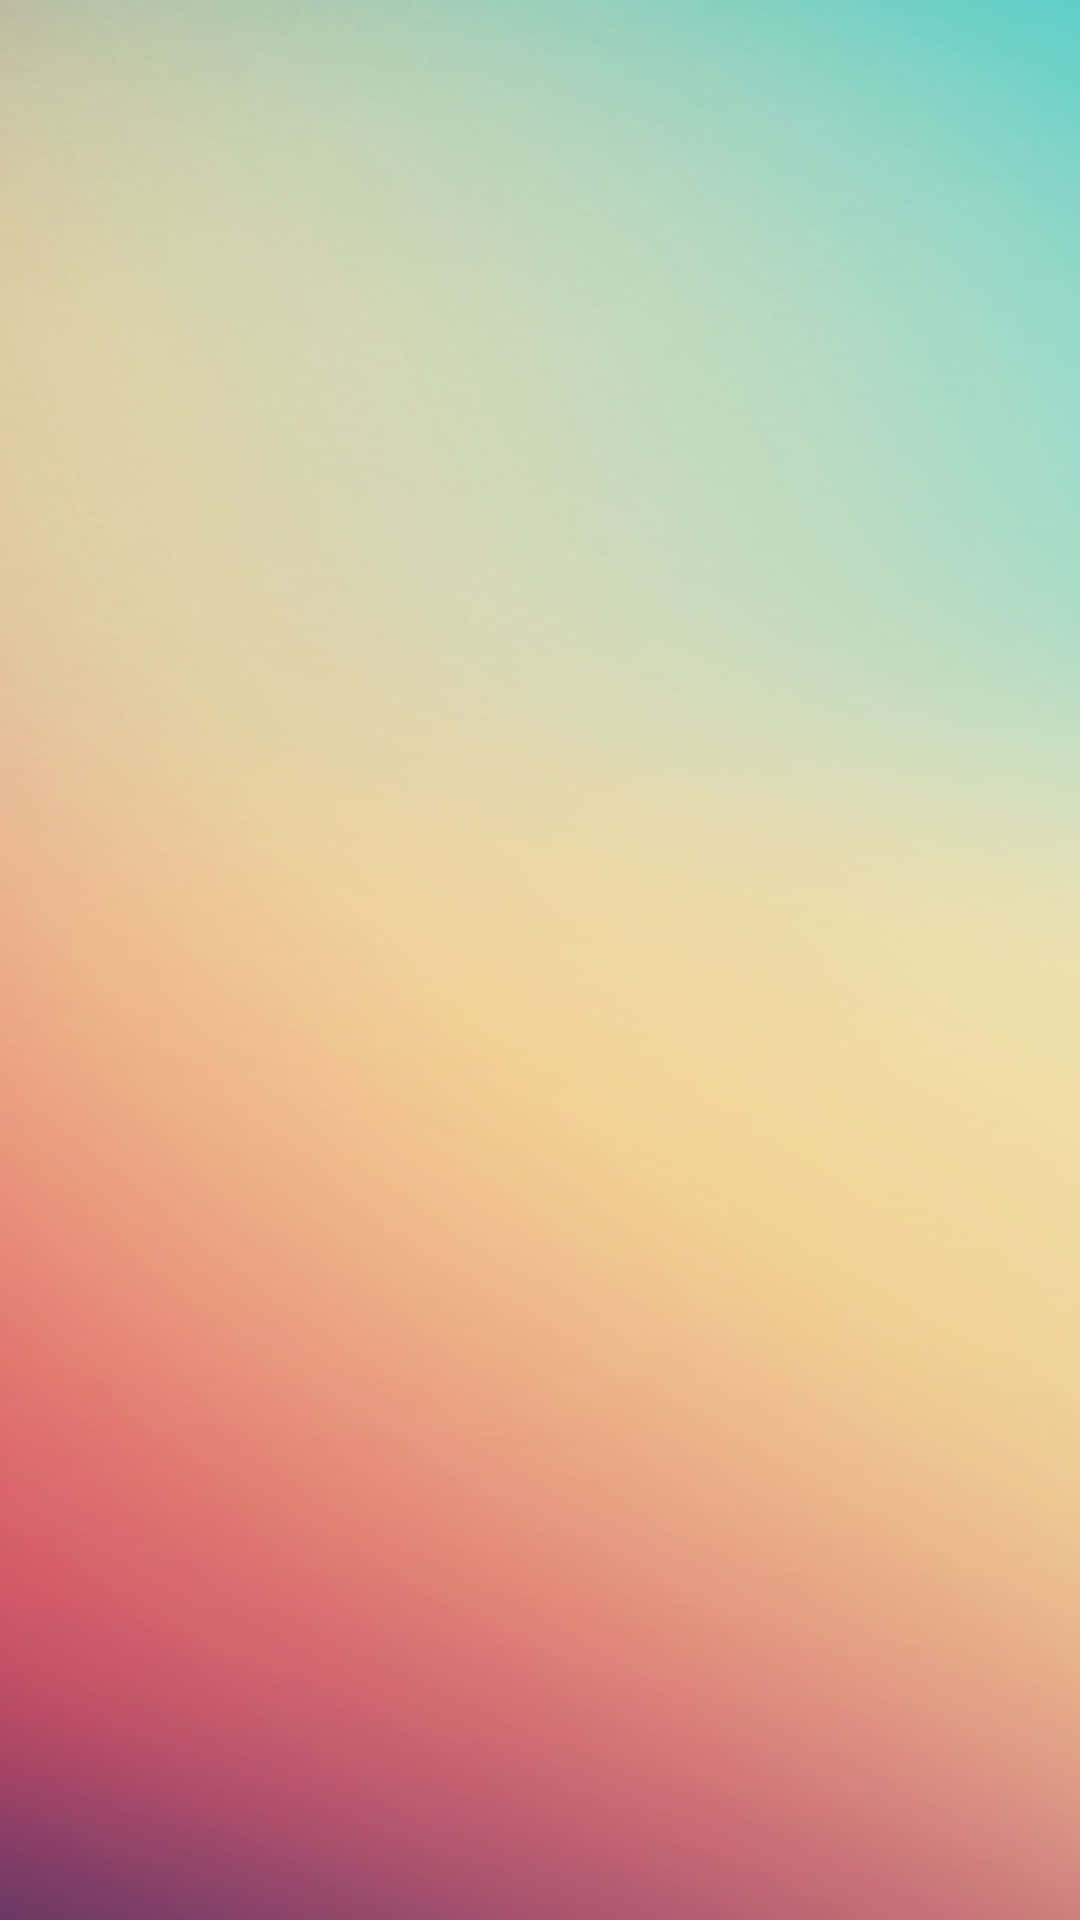 Bright Background Of Gradient Design For Mobile